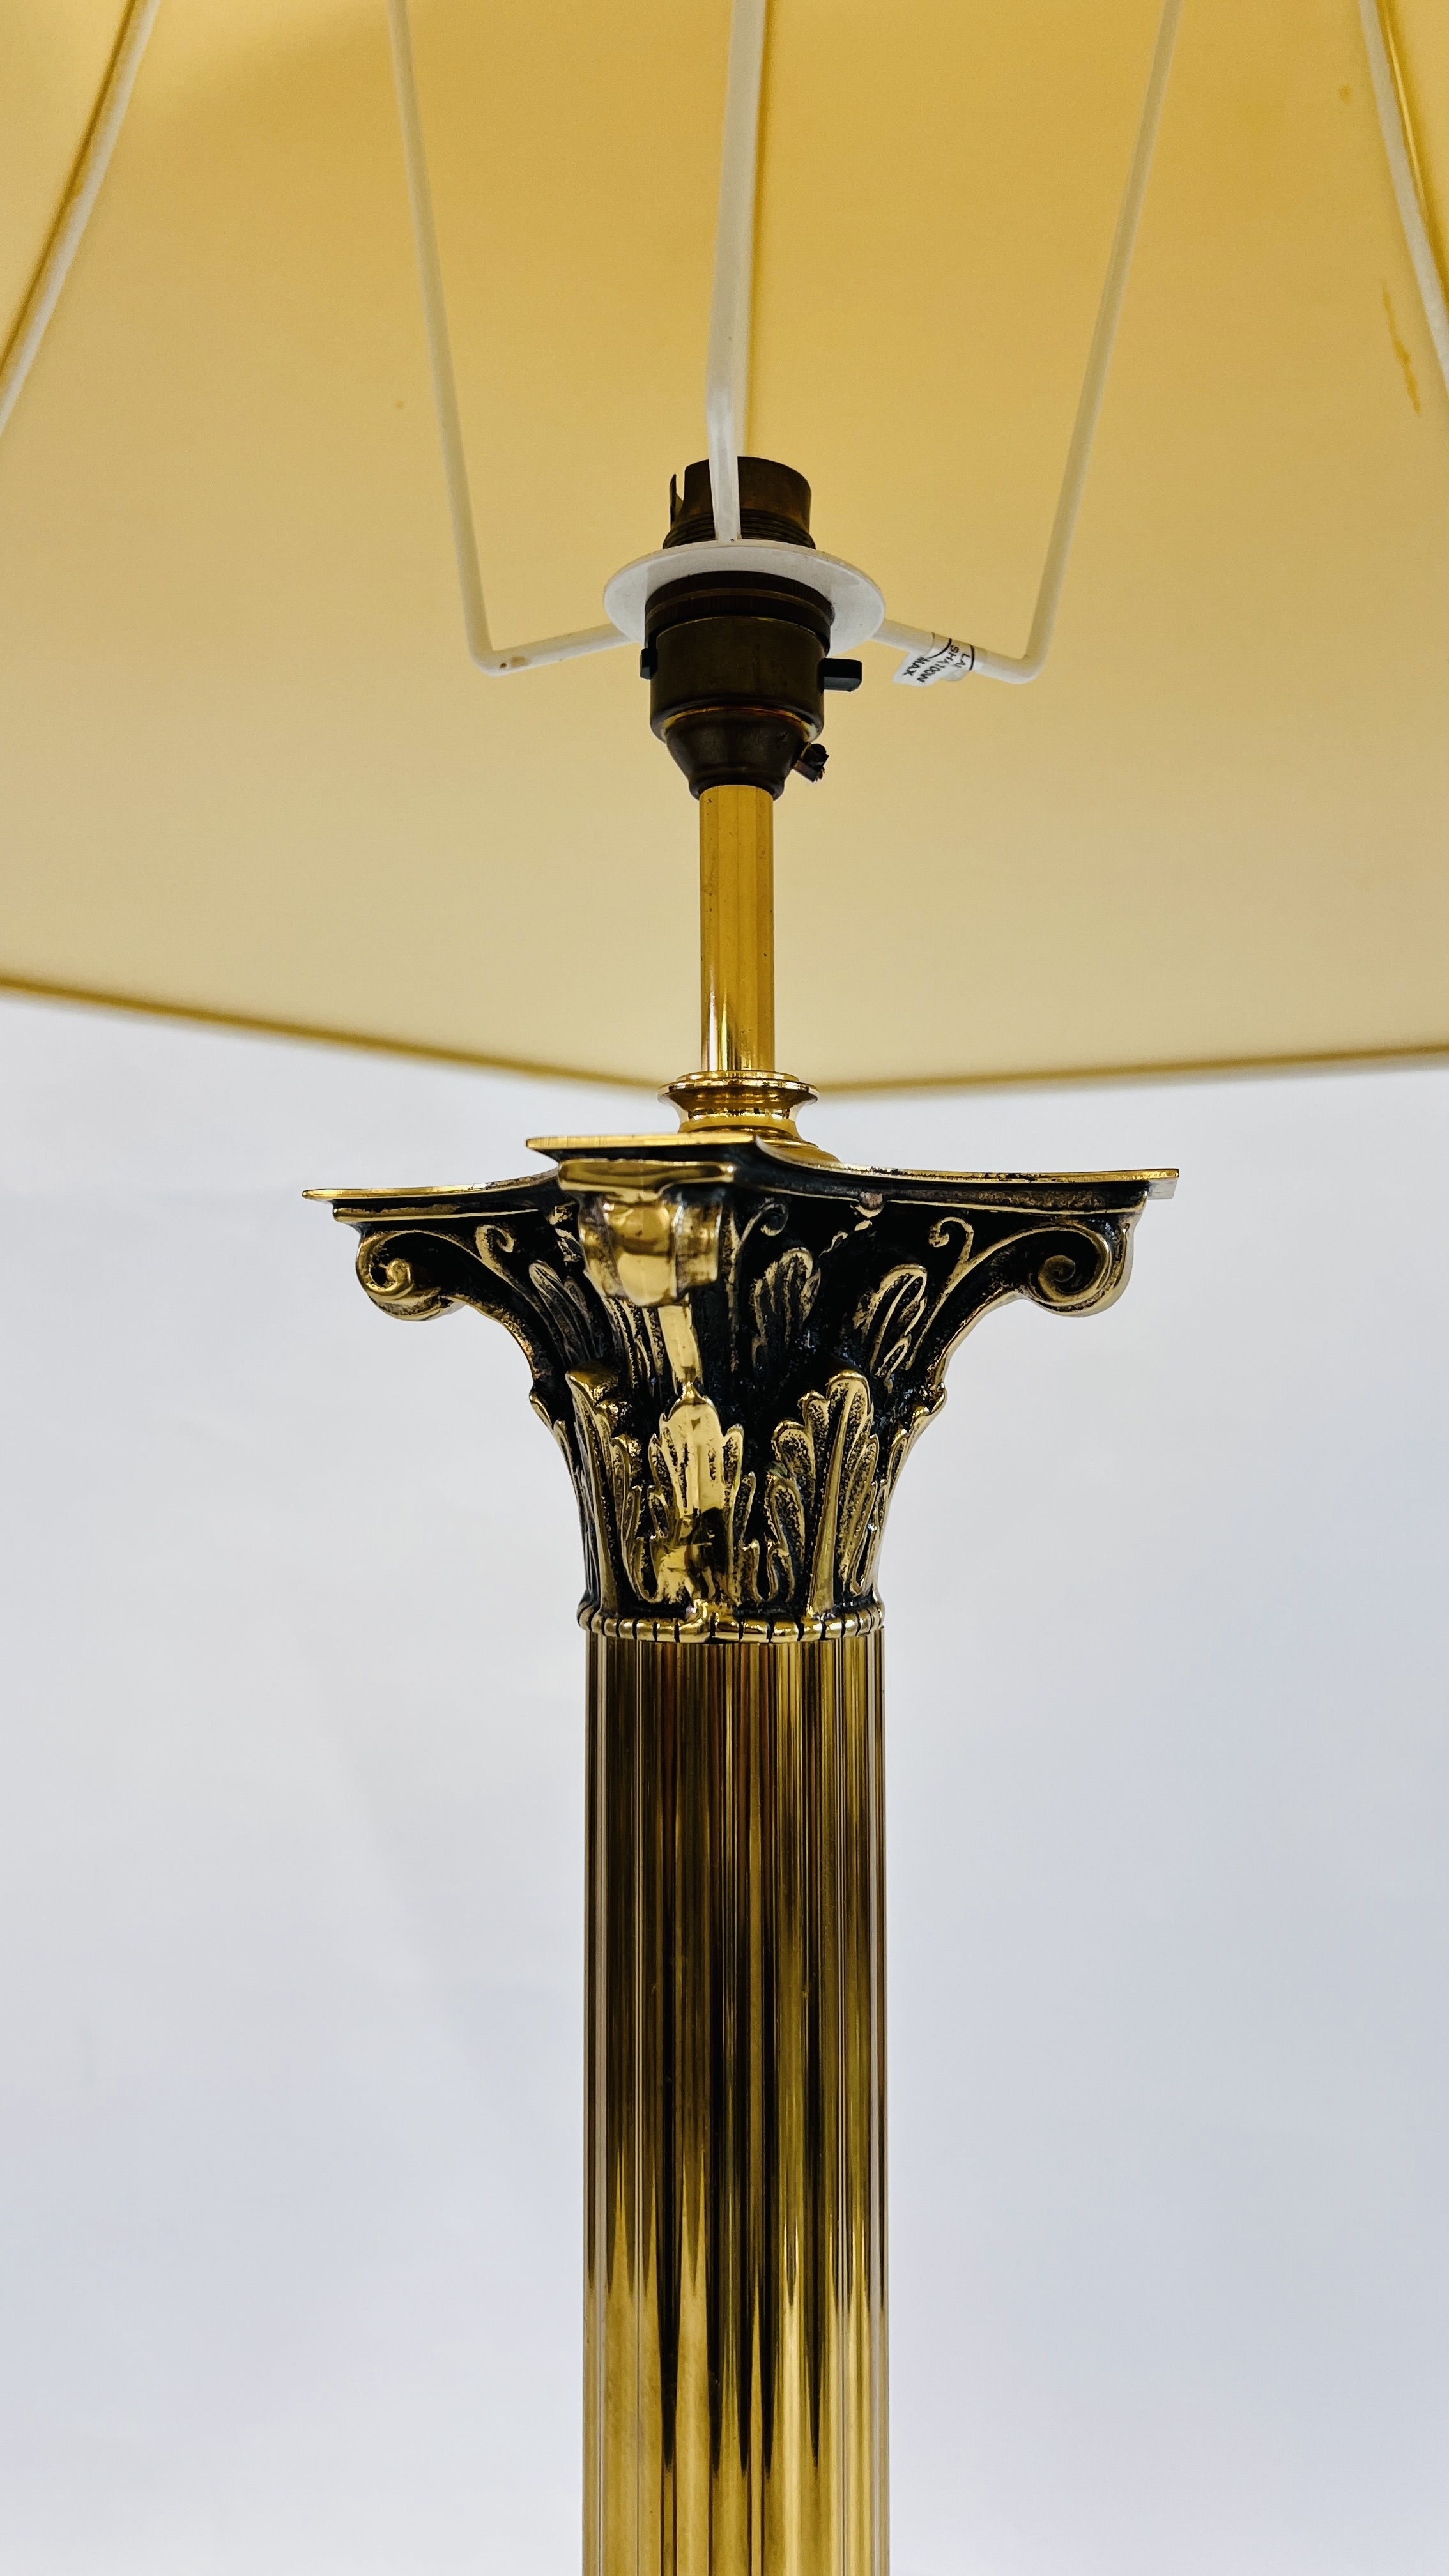 AN IMPRESSIVE HEAVY BRASS CORINTHIAN COLUMN DESIGN TABLE LAMP WITH CREAM PATTERNED SHADE - HEIGHT - Image 4 of 4